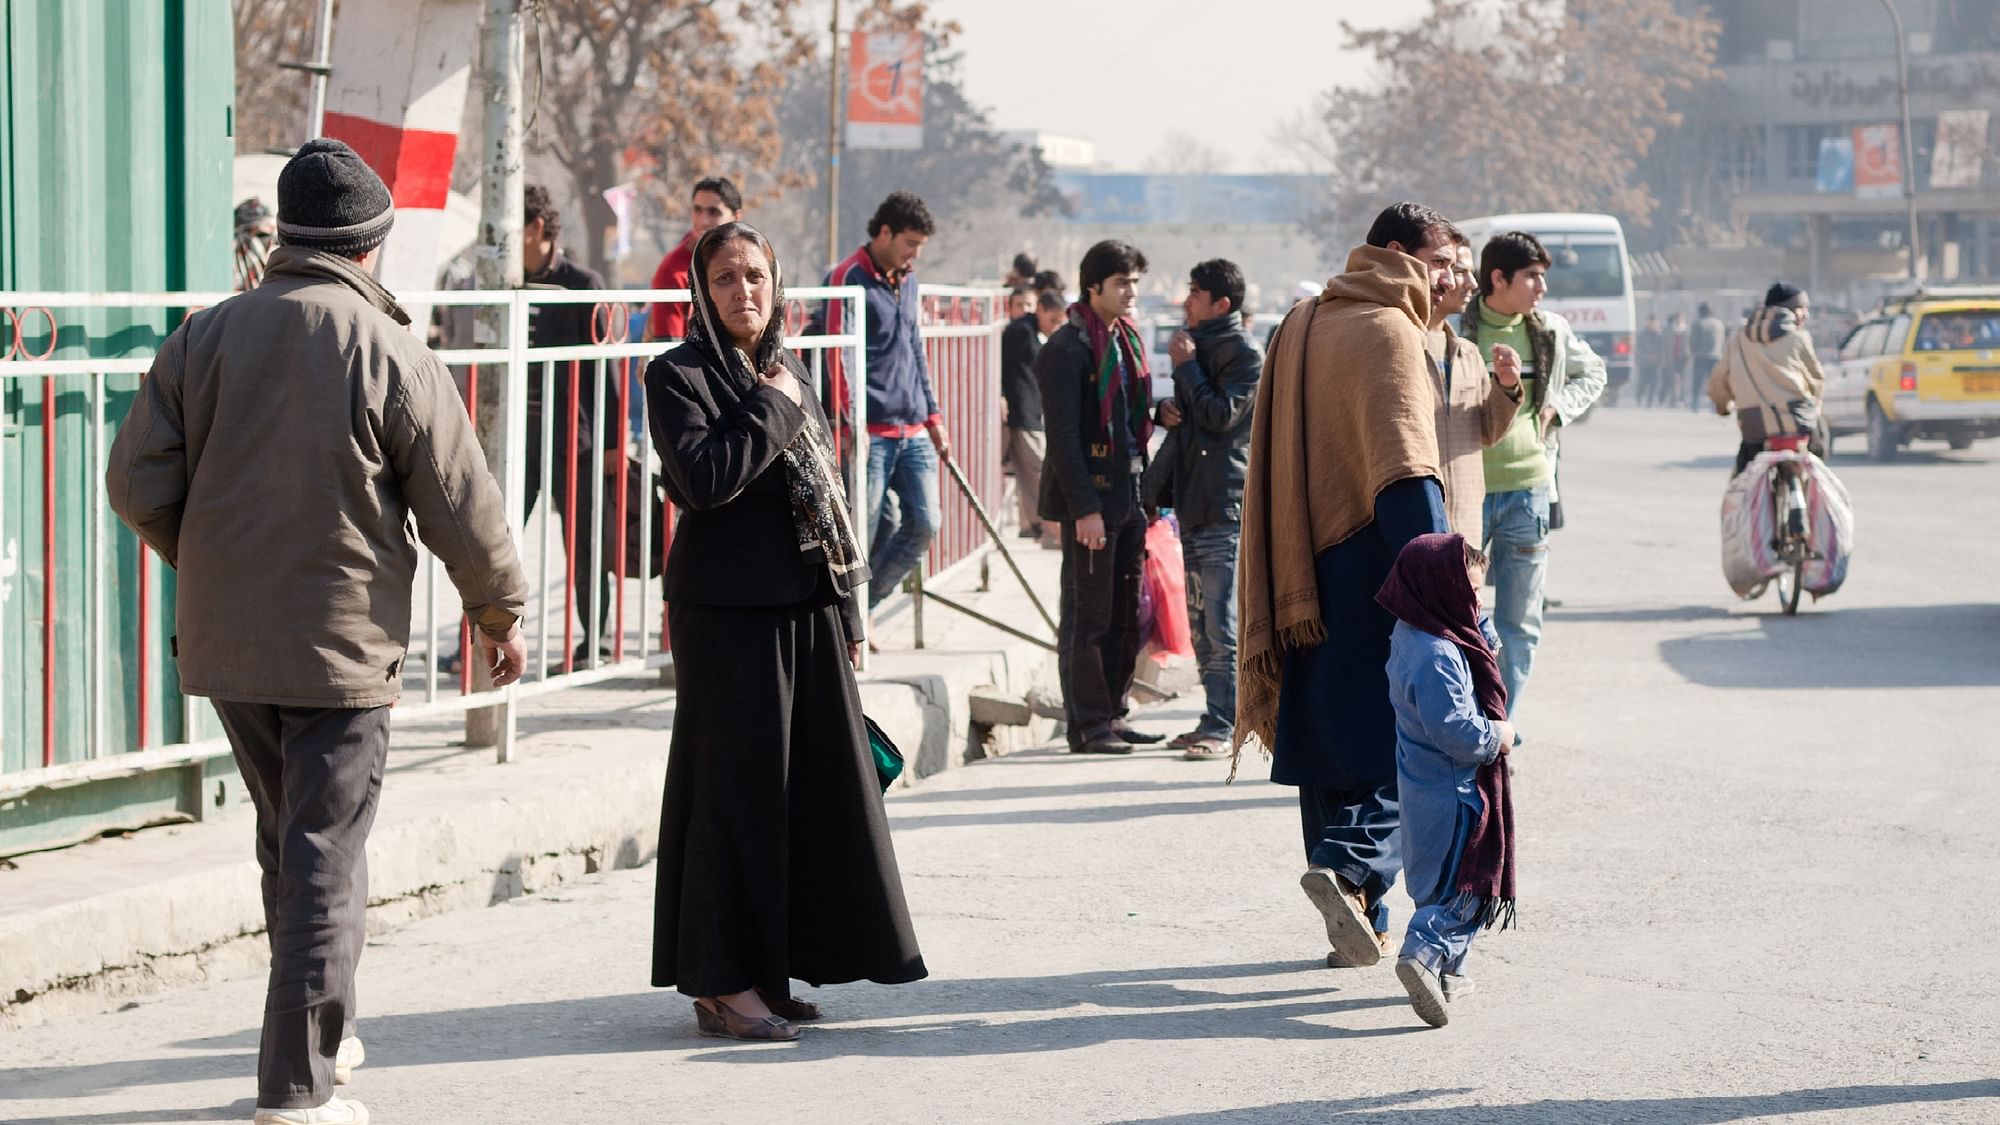 <div class="paragraphs"><p>A street in Kabul. Image used for representational purposes only.&nbsp;</p></div>